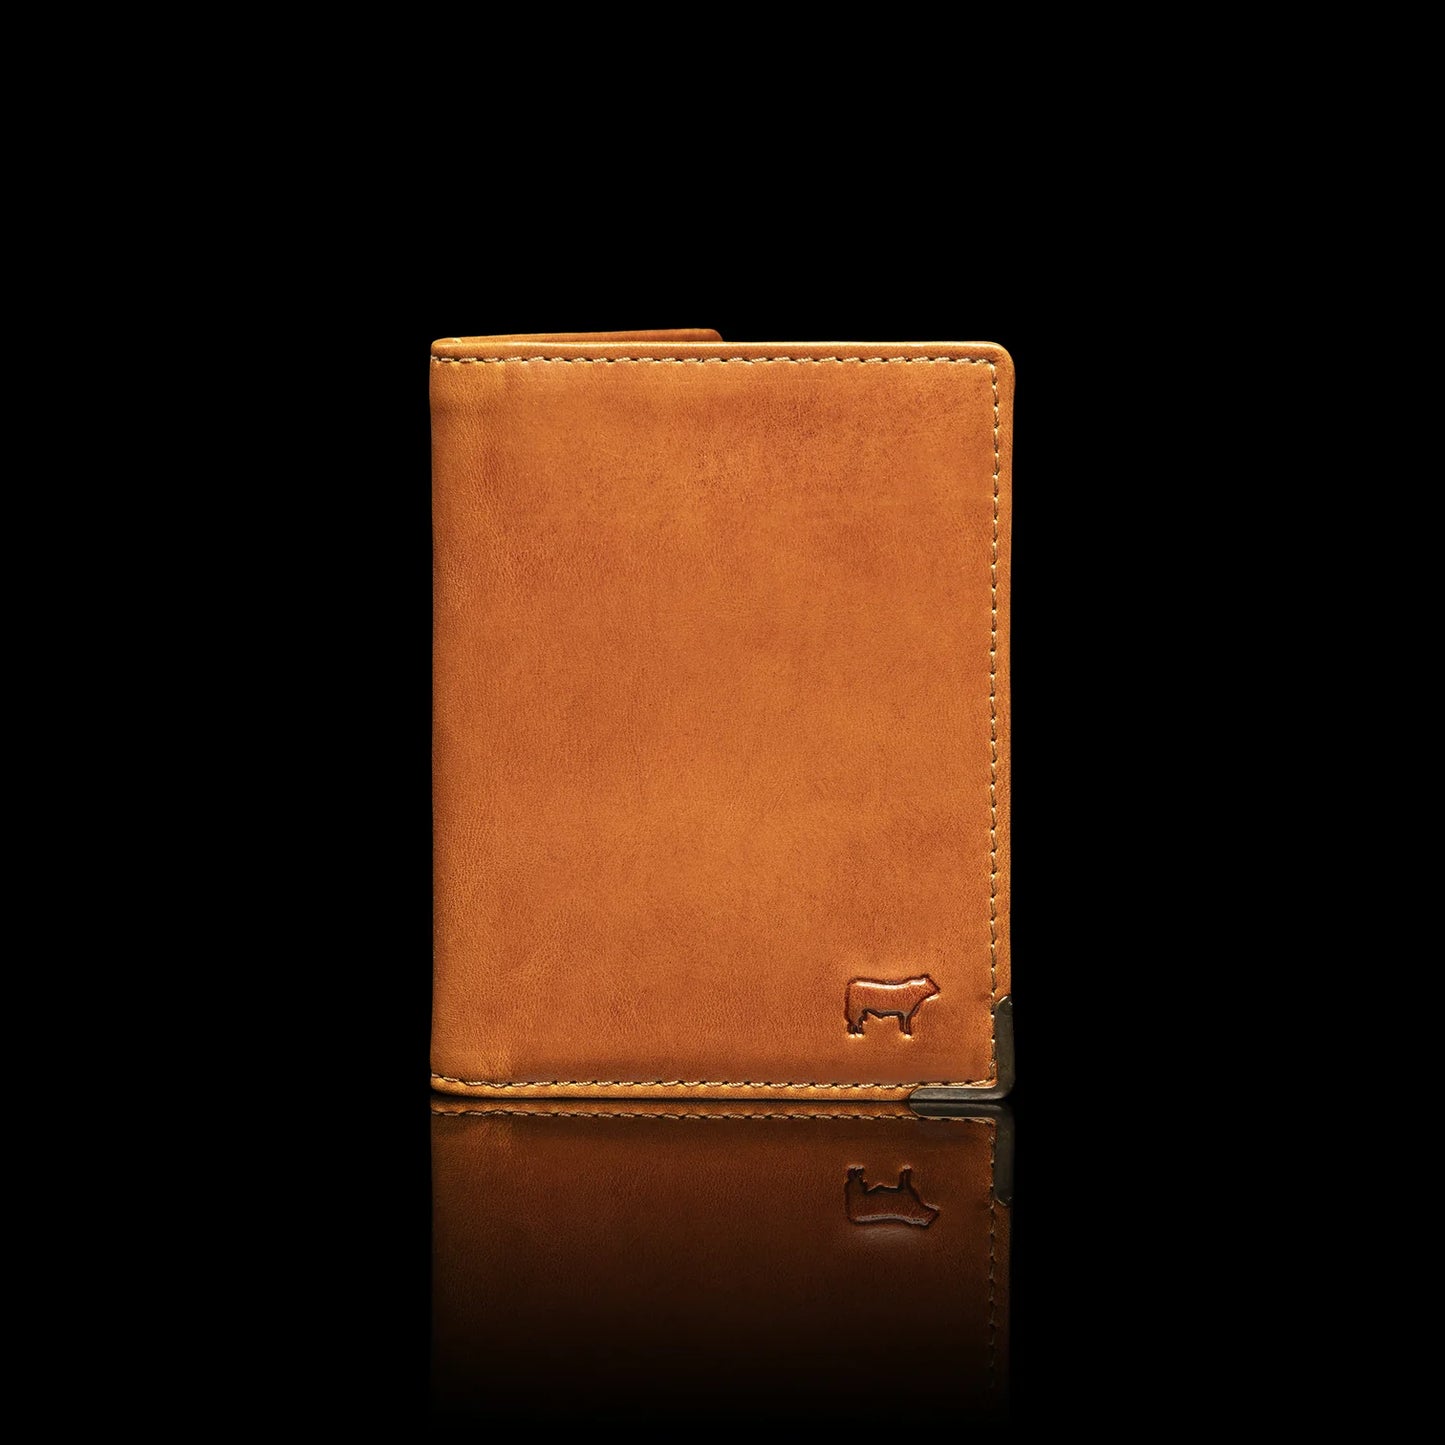 Will Leather Goods Tradesman Slim Wallet in Cognac Leather